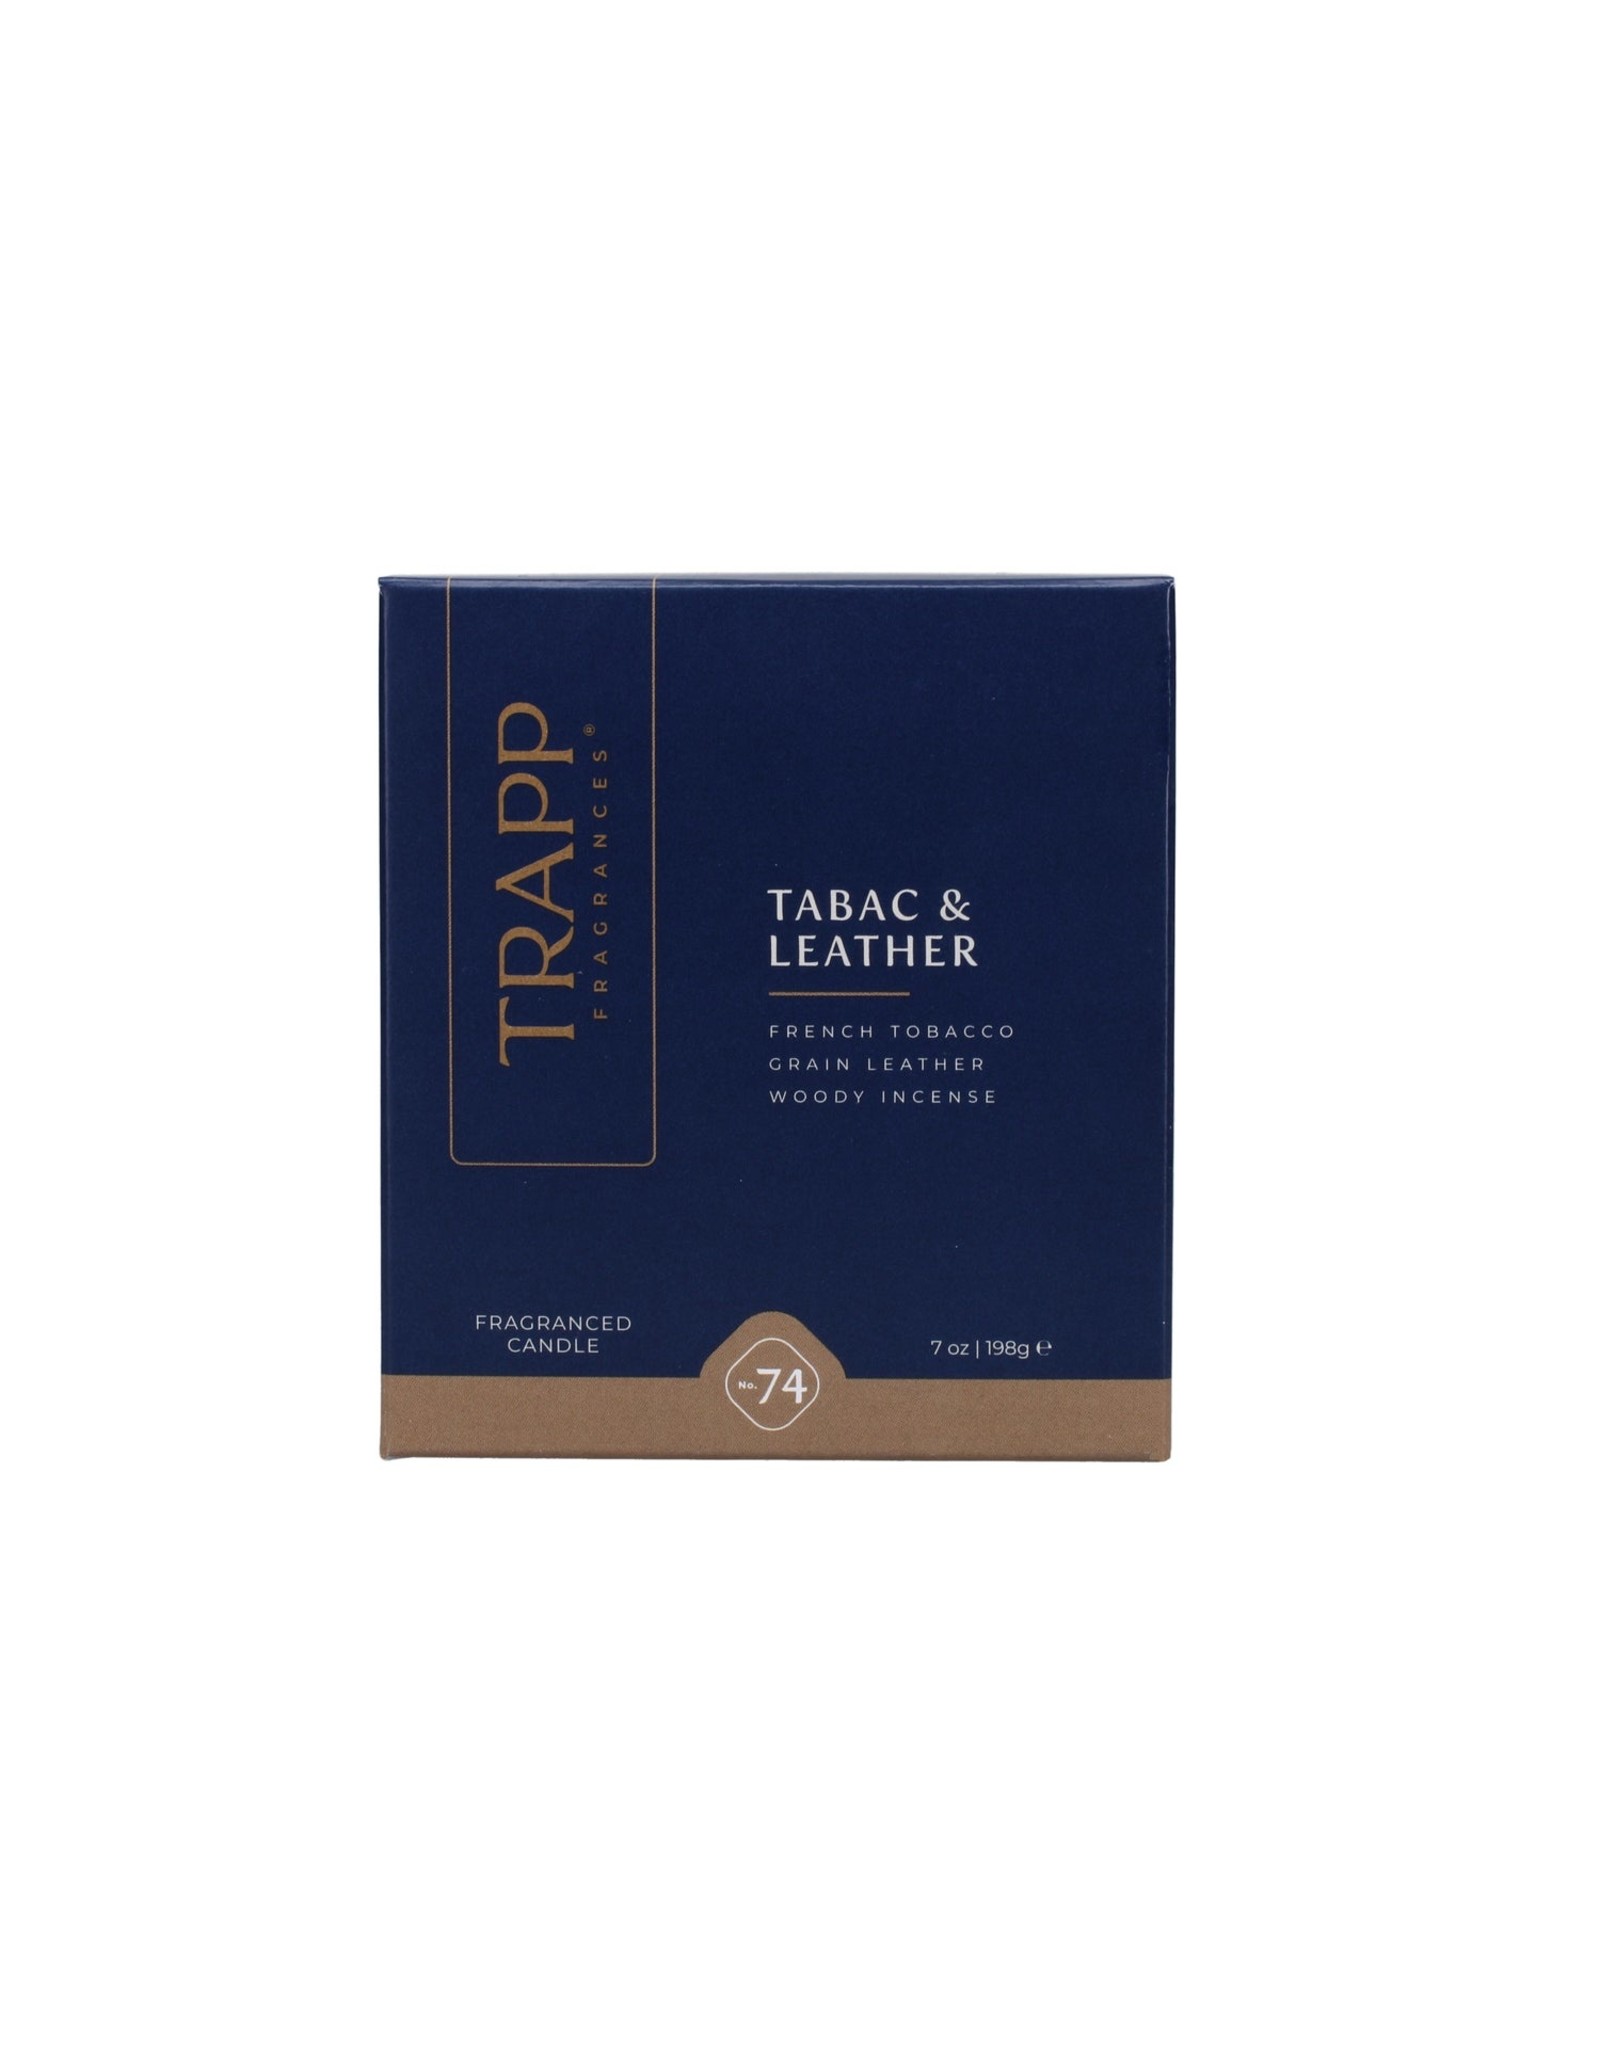 Trapp Trapp No. 74 Tabac & Leather 7 oz. Candle in Signature Box